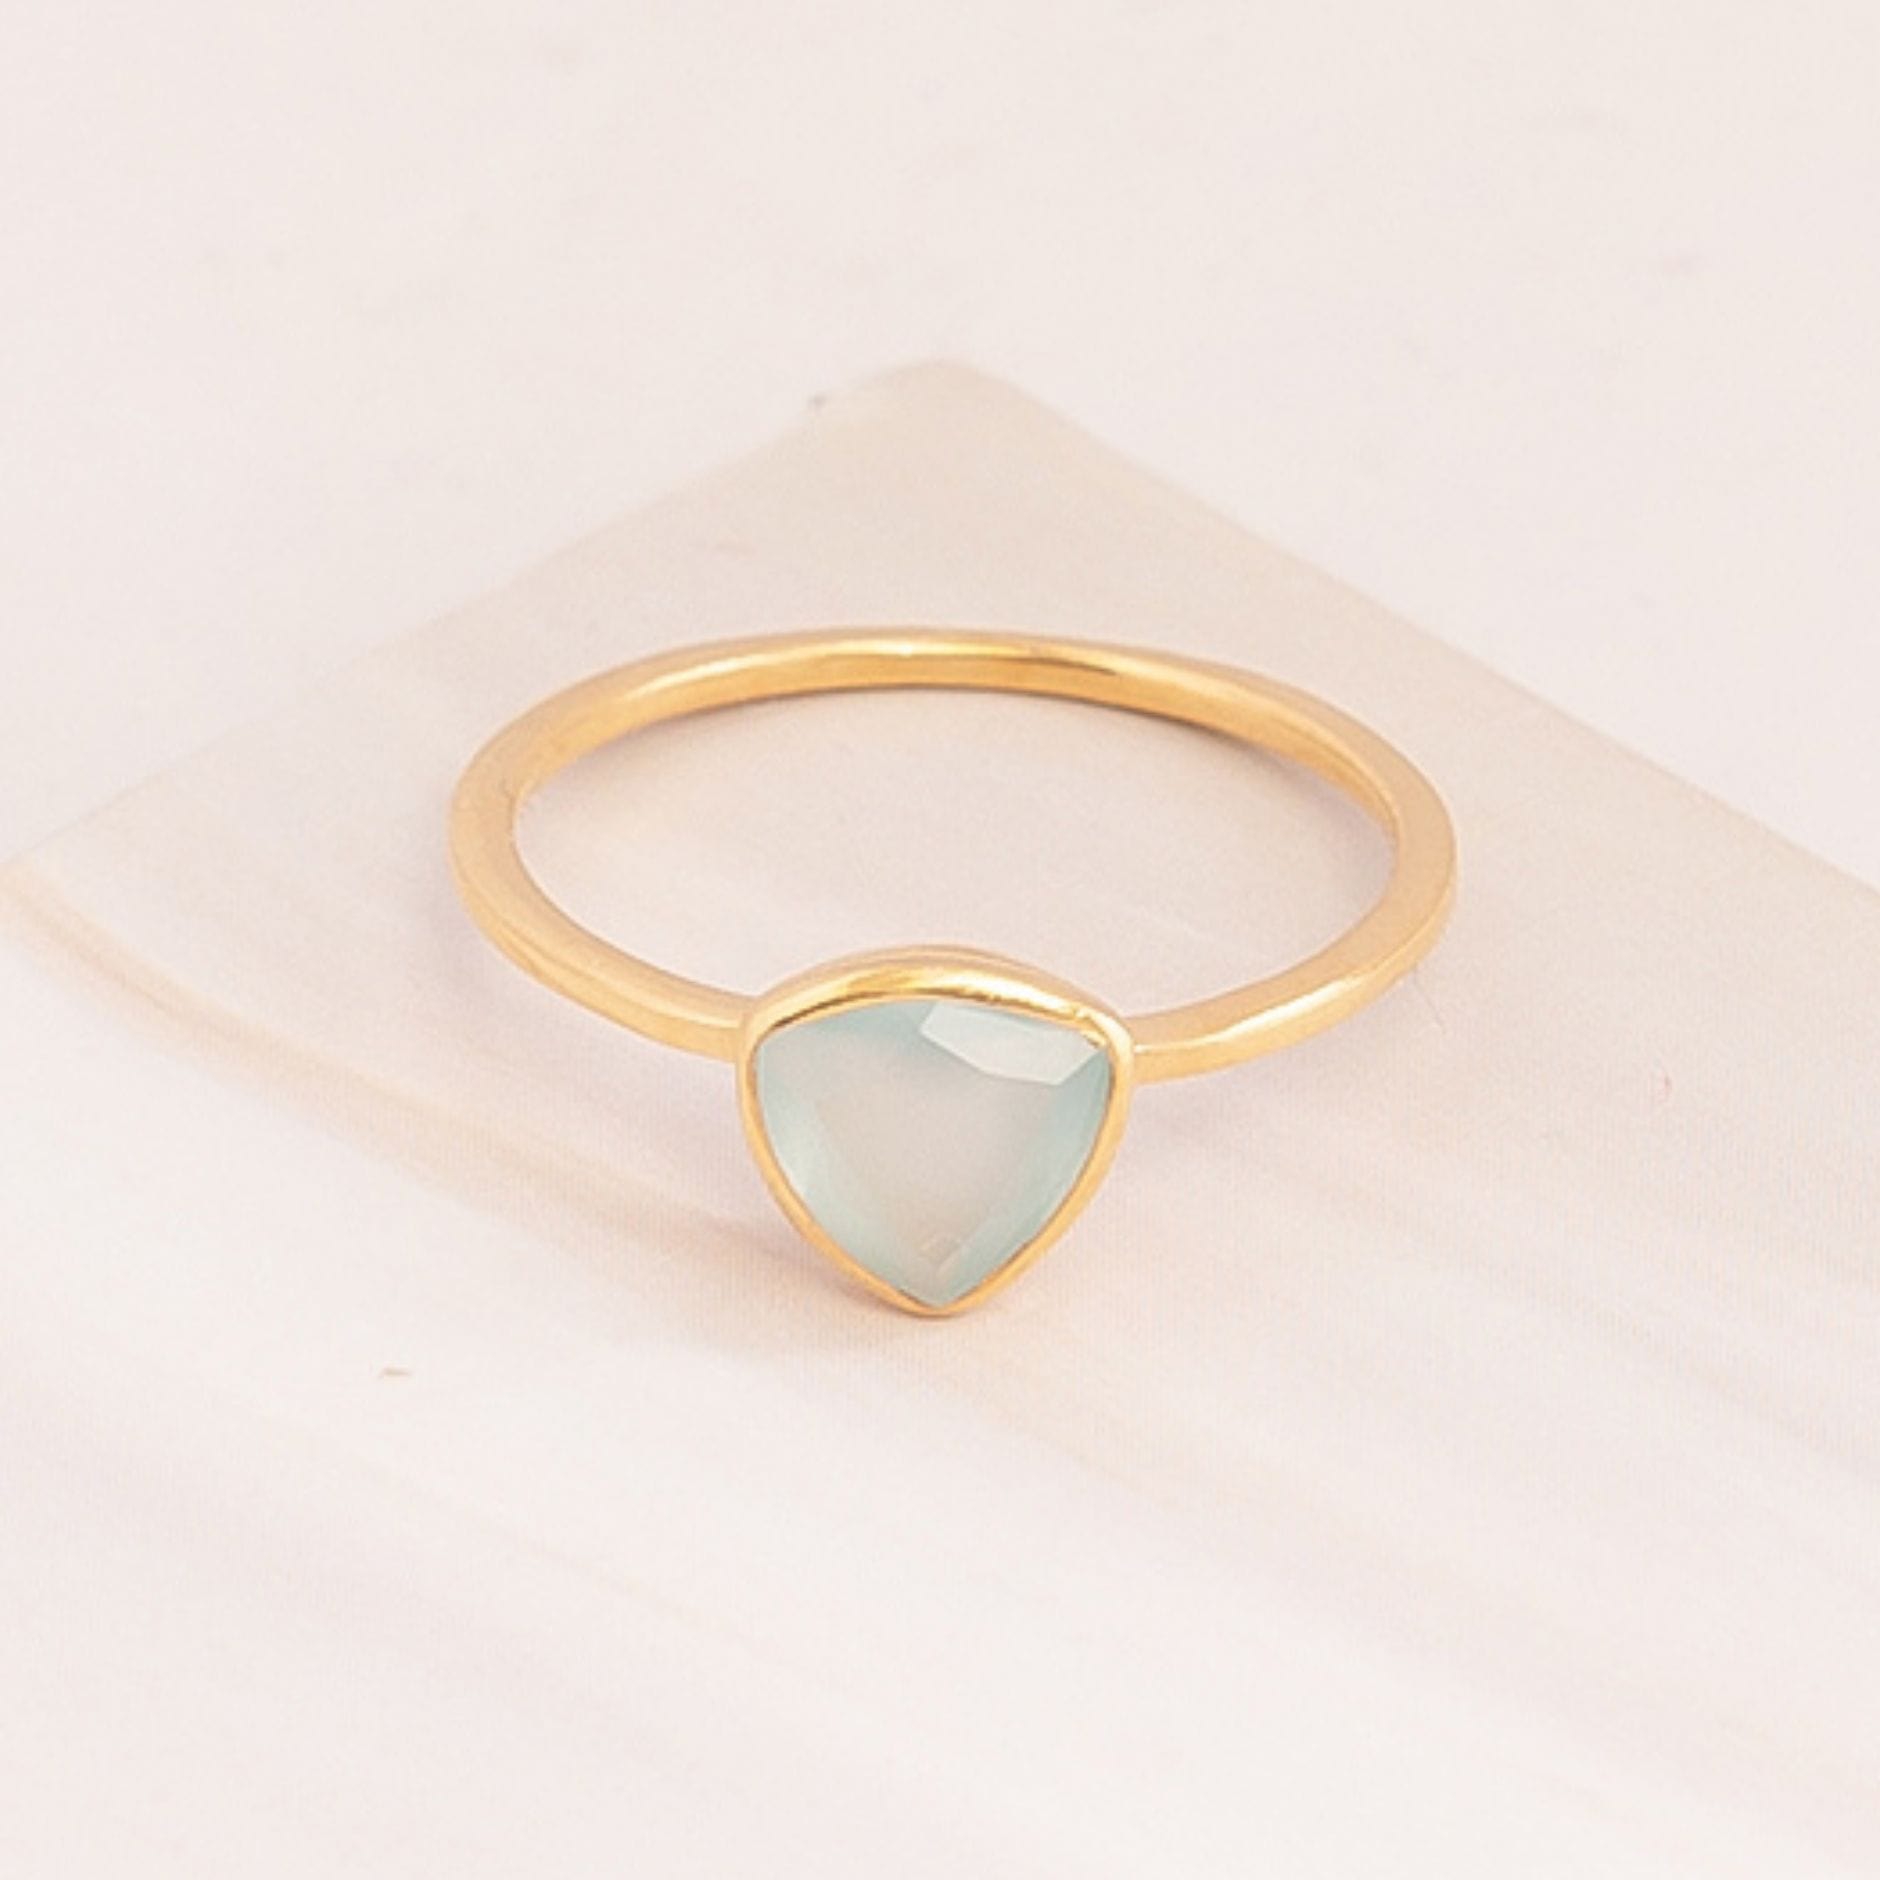 Emblem Jewelry Rings Chalcedony / Triangle Signature Candy Gemstone Stack Rings (Ring Size 9)